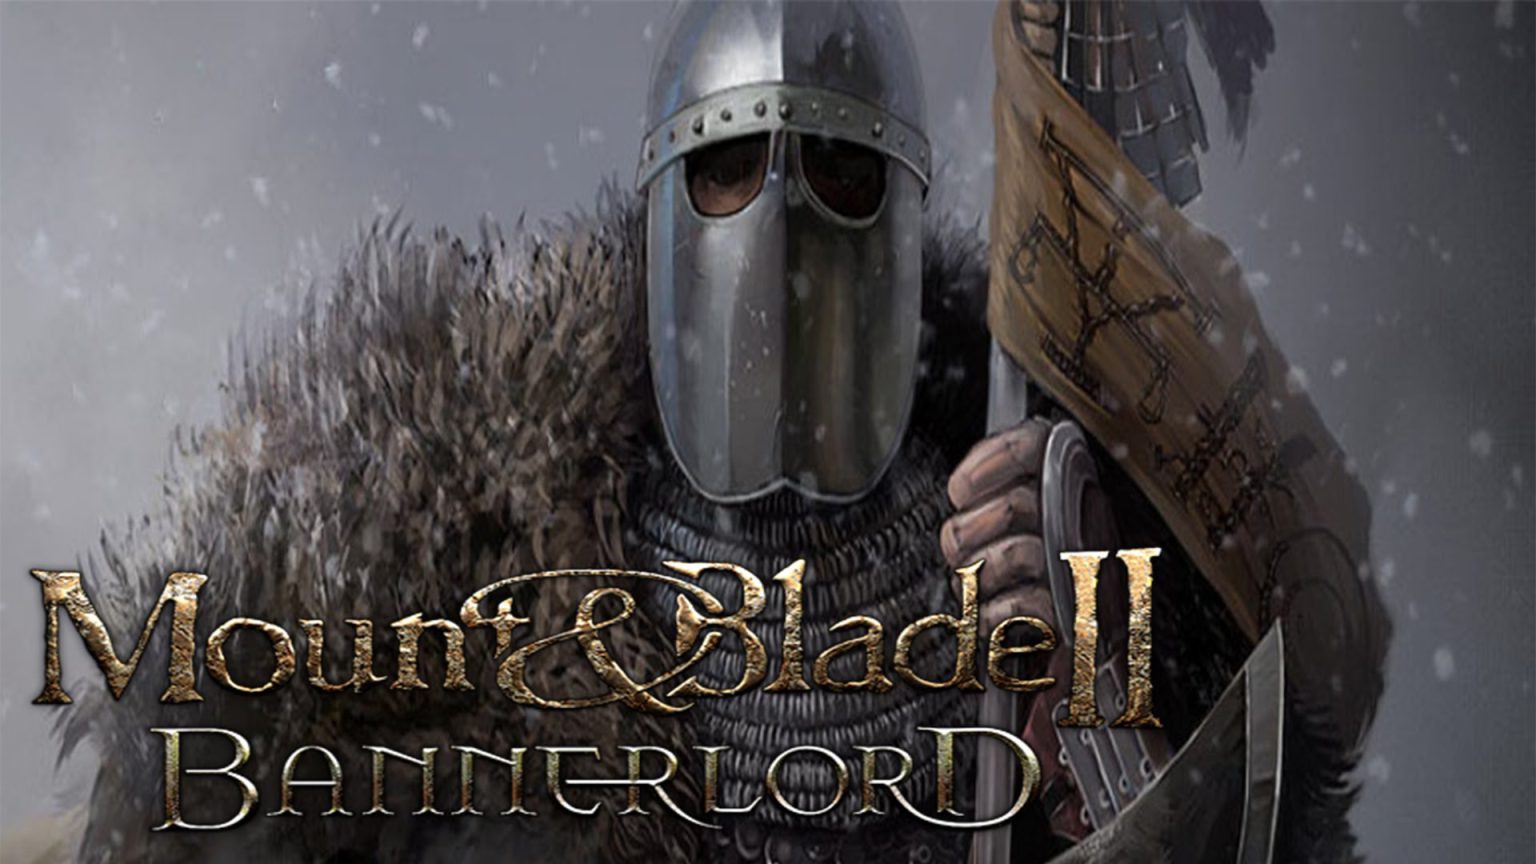 Mount & blade 2: bannerlord